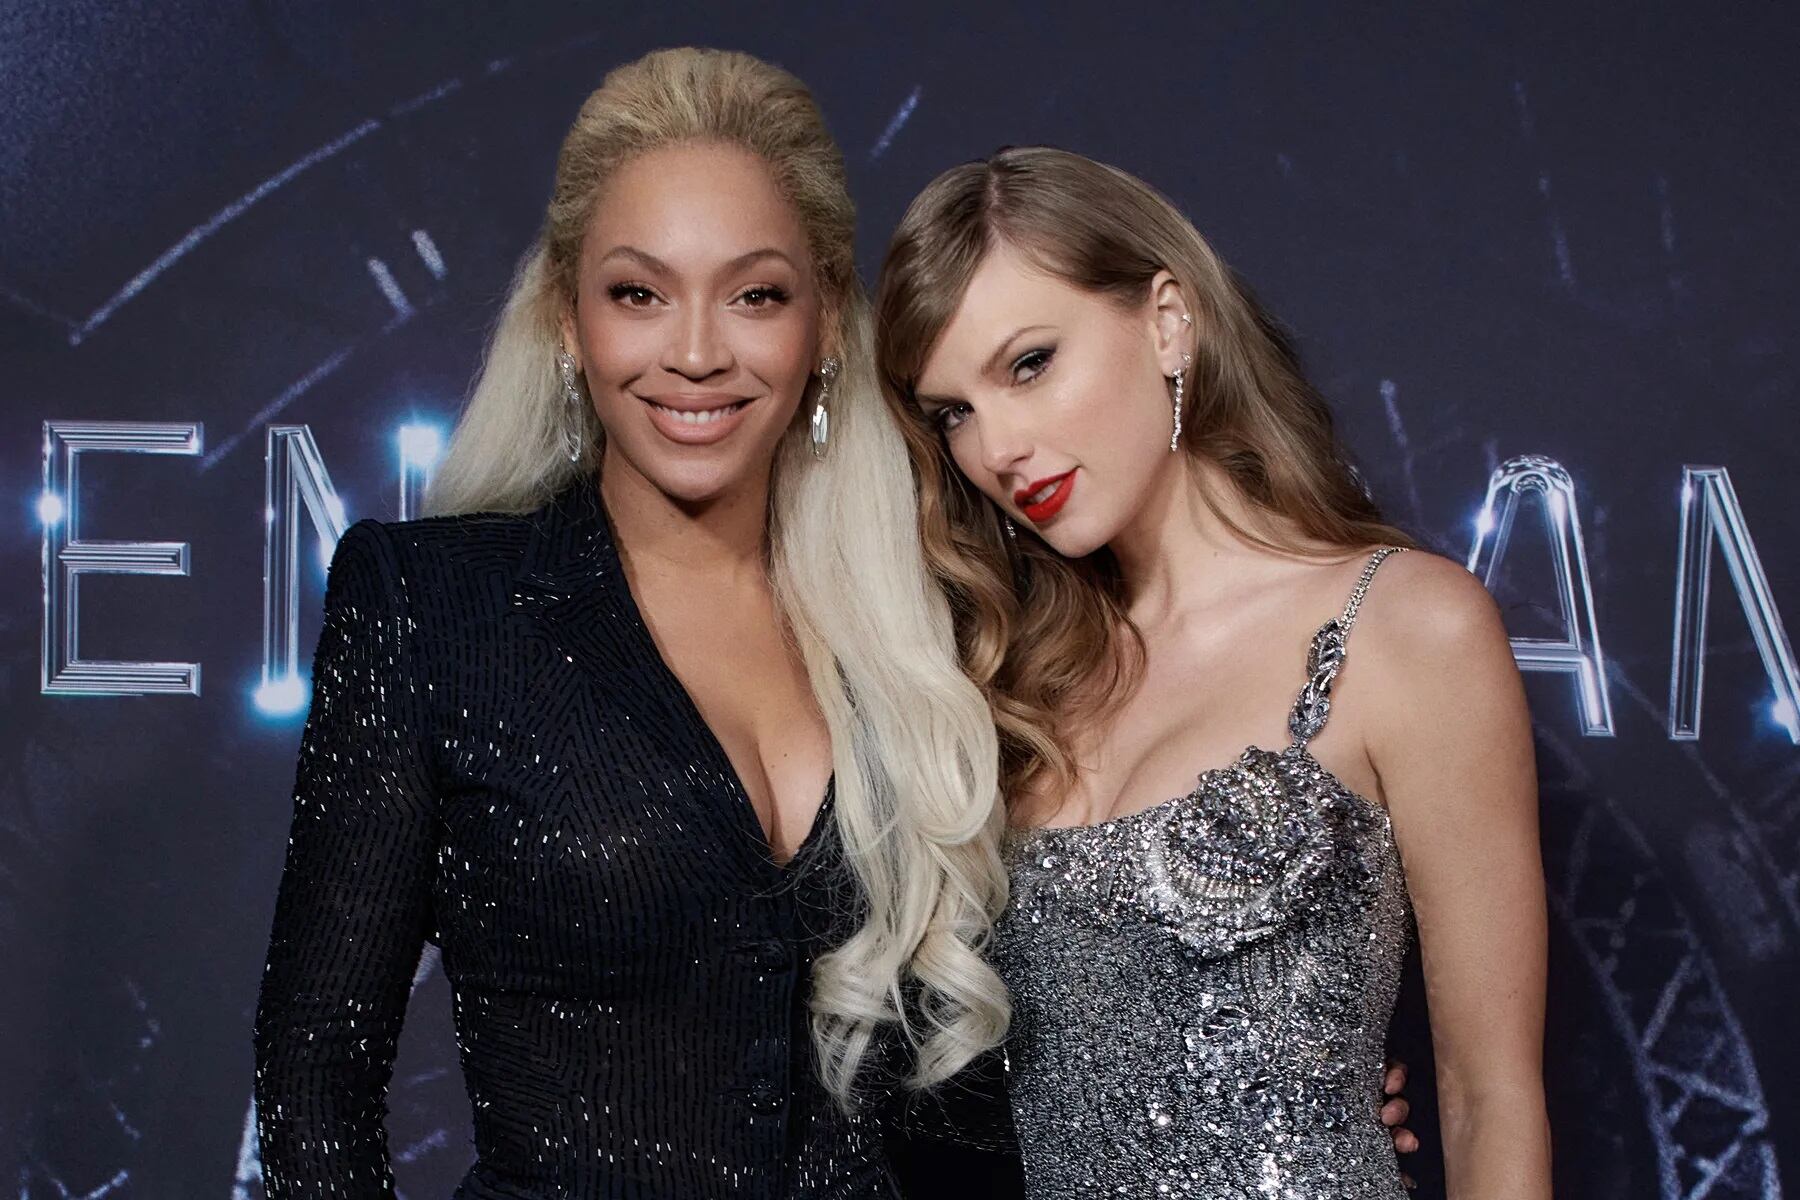 AMC’s Revenue Soars With Taylor Swift And Beyoncé Concert Movies